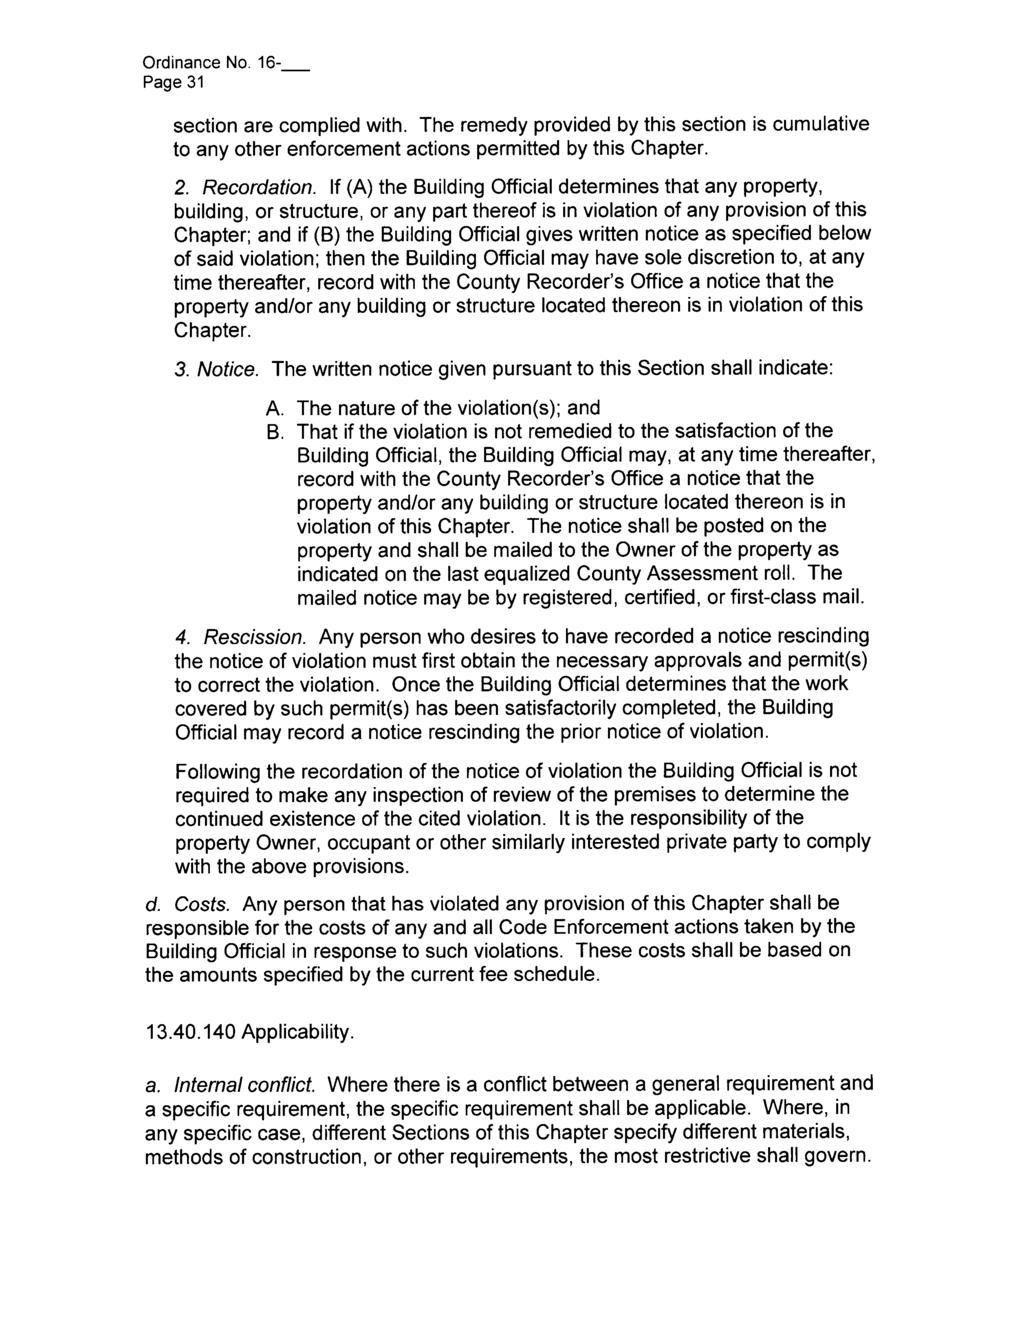 Page 31 section are complied with. The remedy provided by this section is cumulative to any other enforcement actions permitted by this Chapter. 2. Recordation.